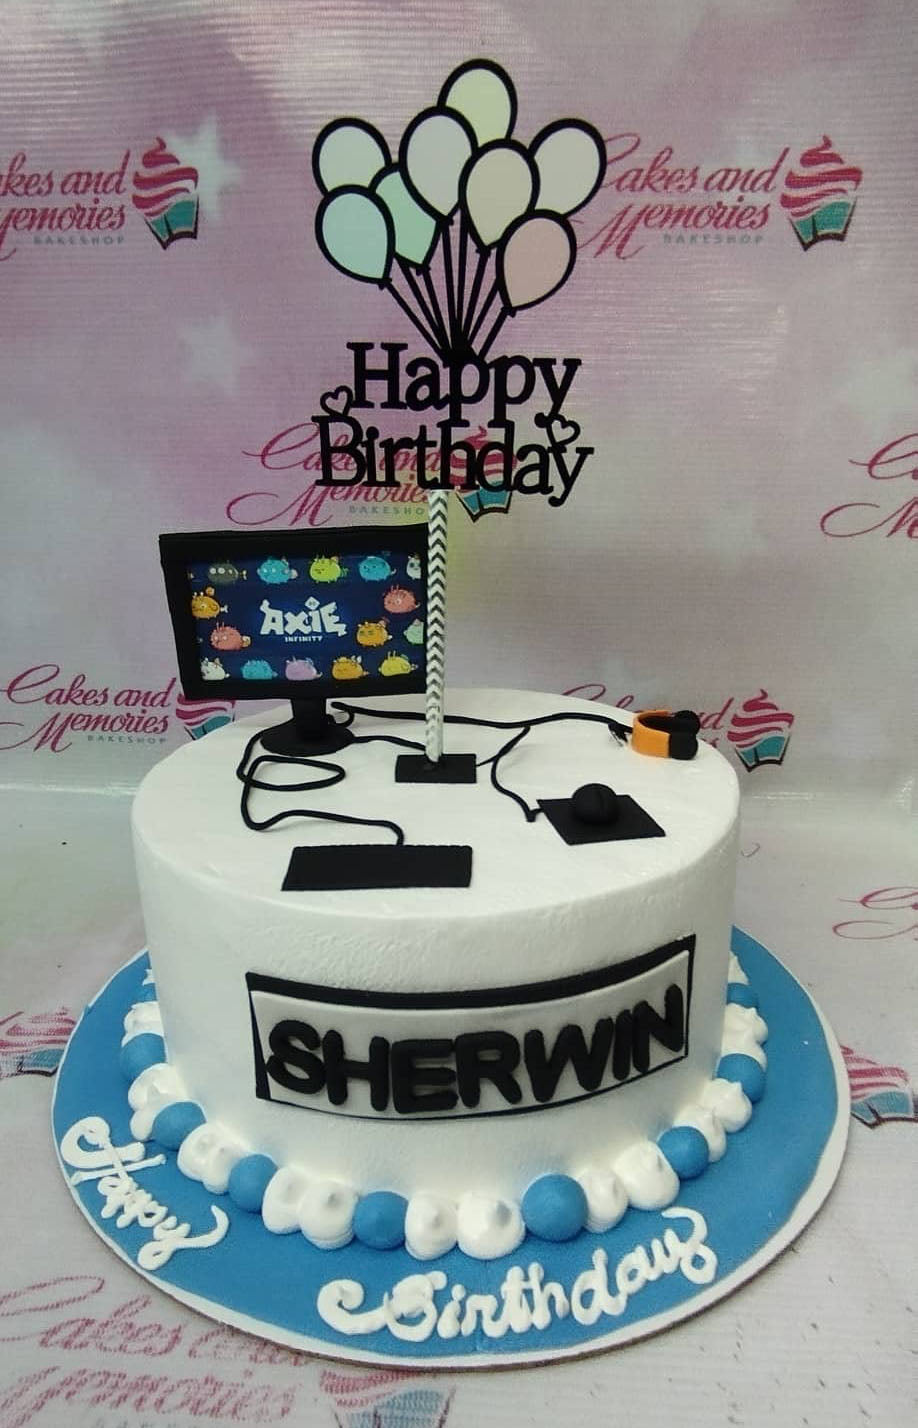 Hugs & Kisses Celebration Cakes - 18th Birthday cake for a gaming  enthusiast. Featuring the birthday boy's gaming handle (name) on the  monitor and miniature replicas of his gaming equipment including the